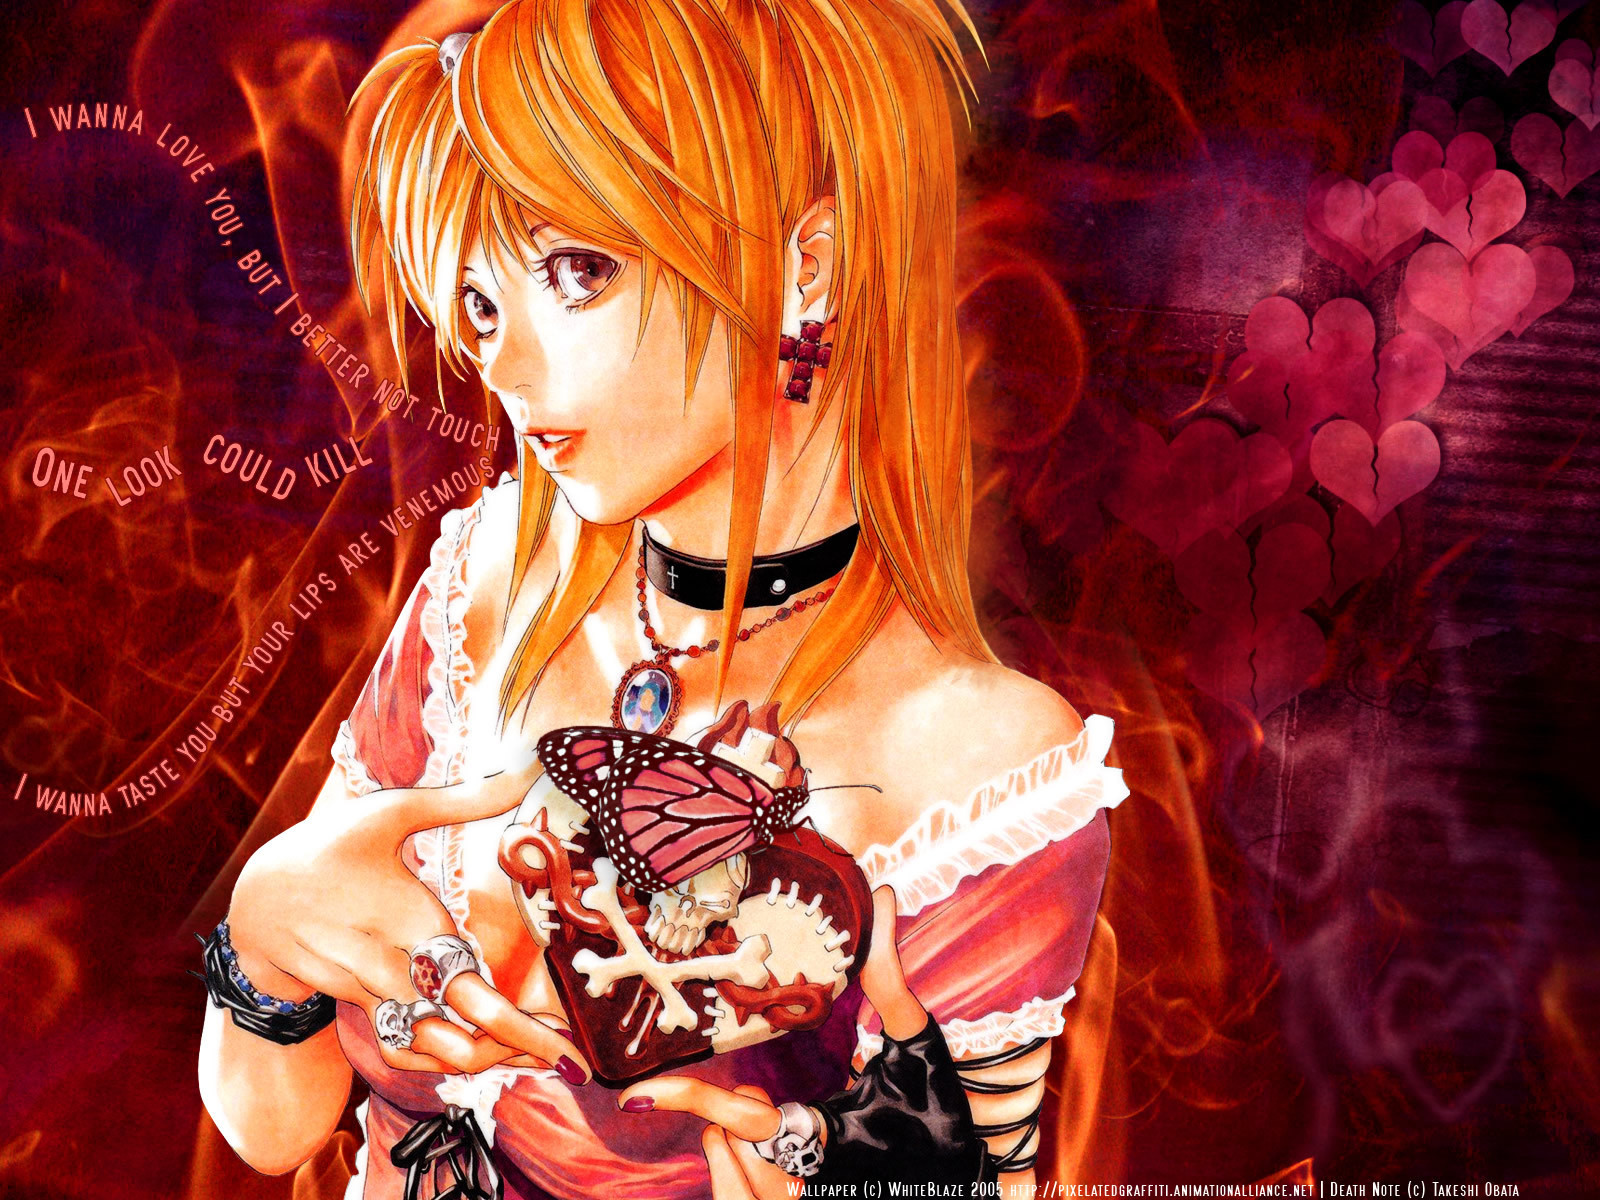 2. Misa Amane from Death Note - wide 4